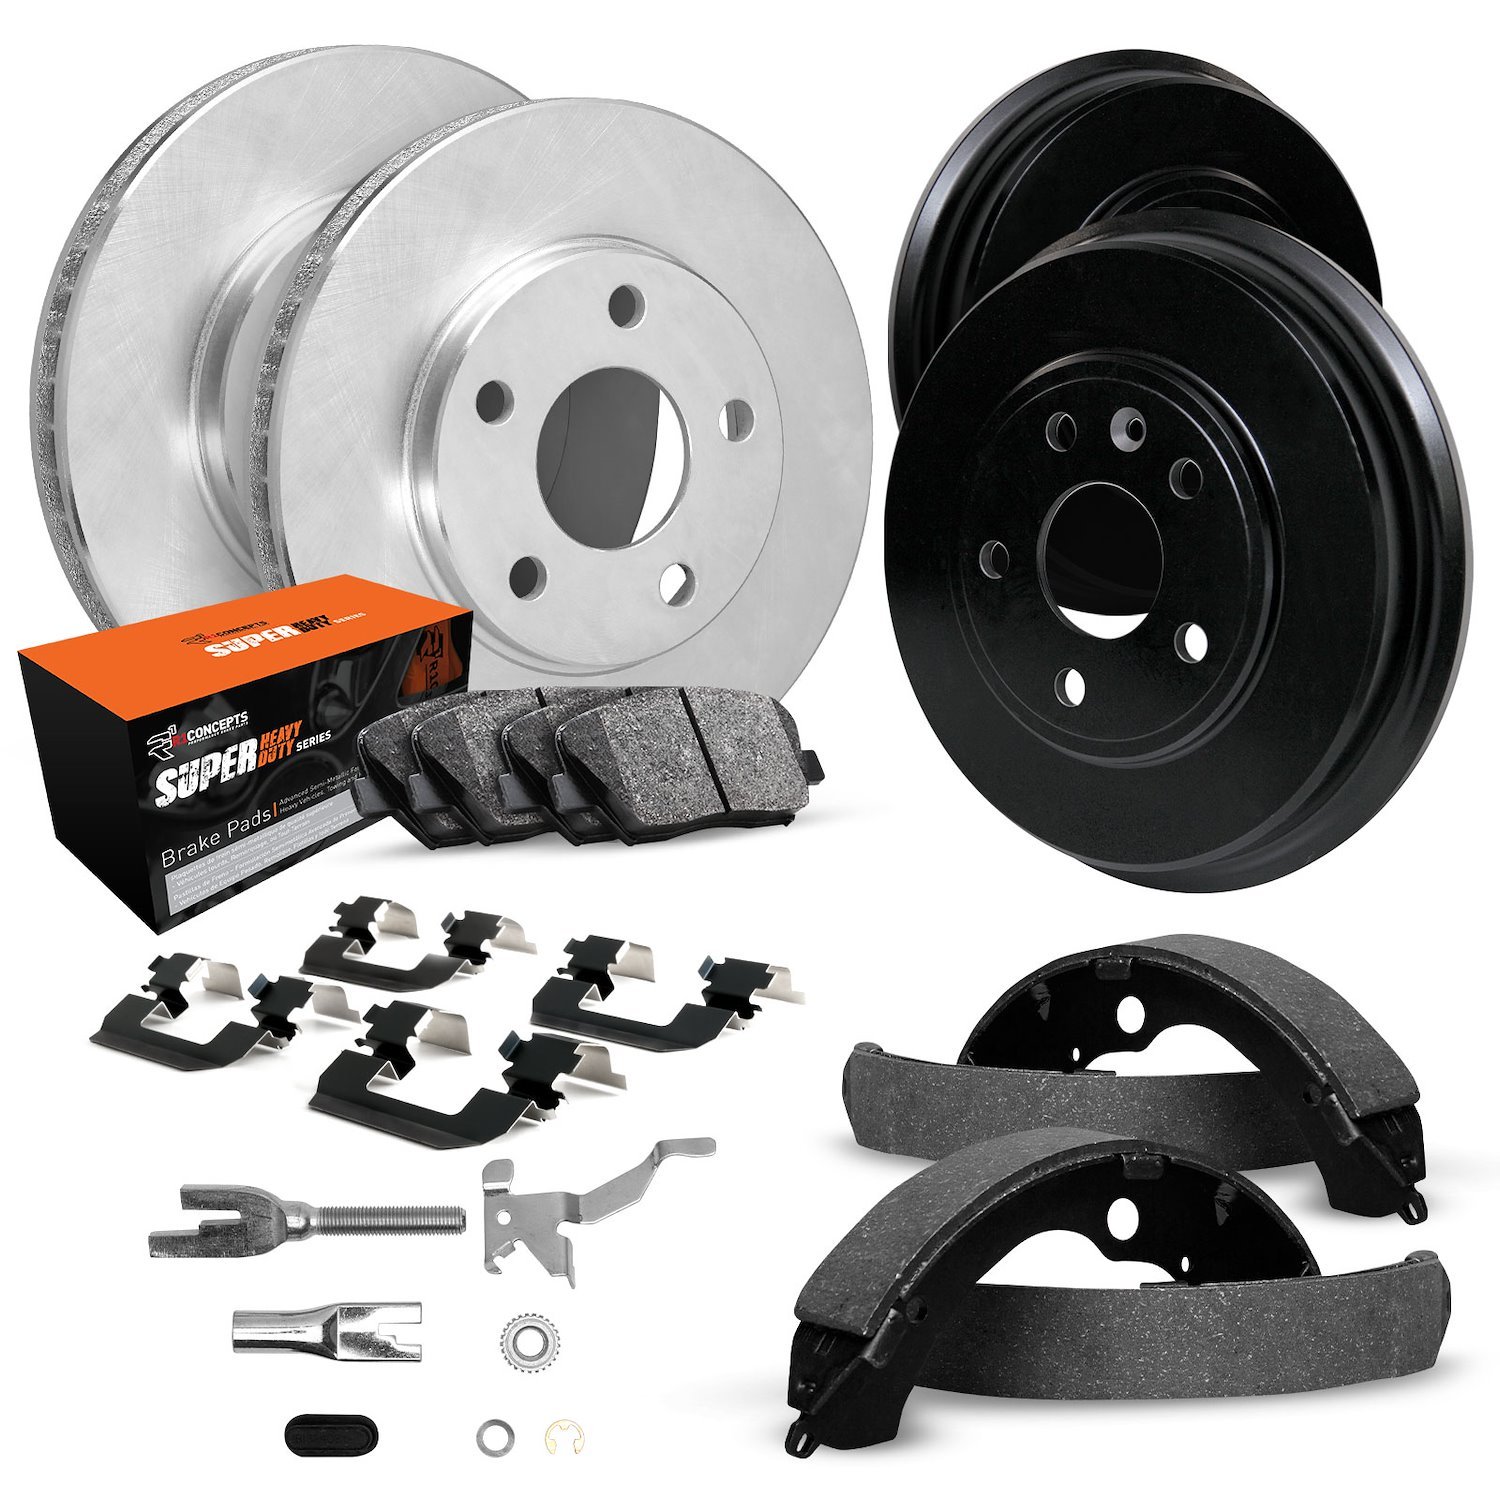 E-Line Blank Brake Rotor & Drum Set w/Super-Duty Pads, Shoes, Hardware, & Adjusters, 1995-2000 GM, Position: Front & Rear